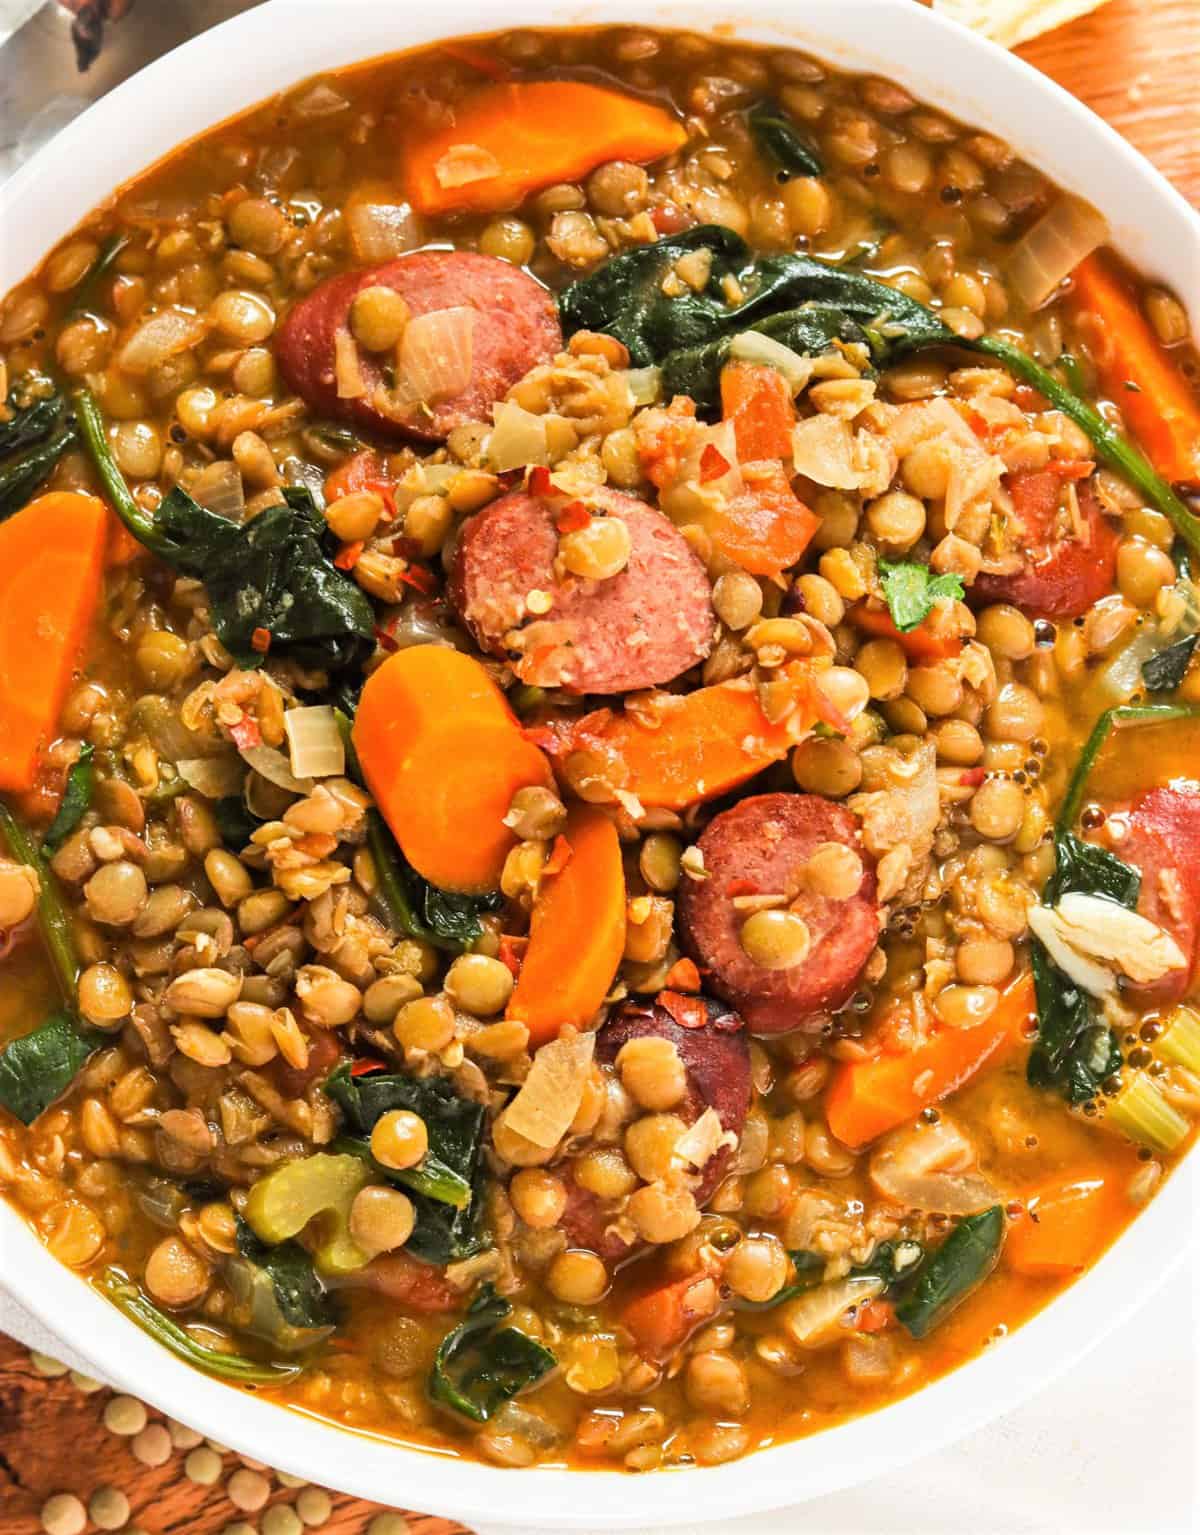 Your family will love the sausage lentil soup